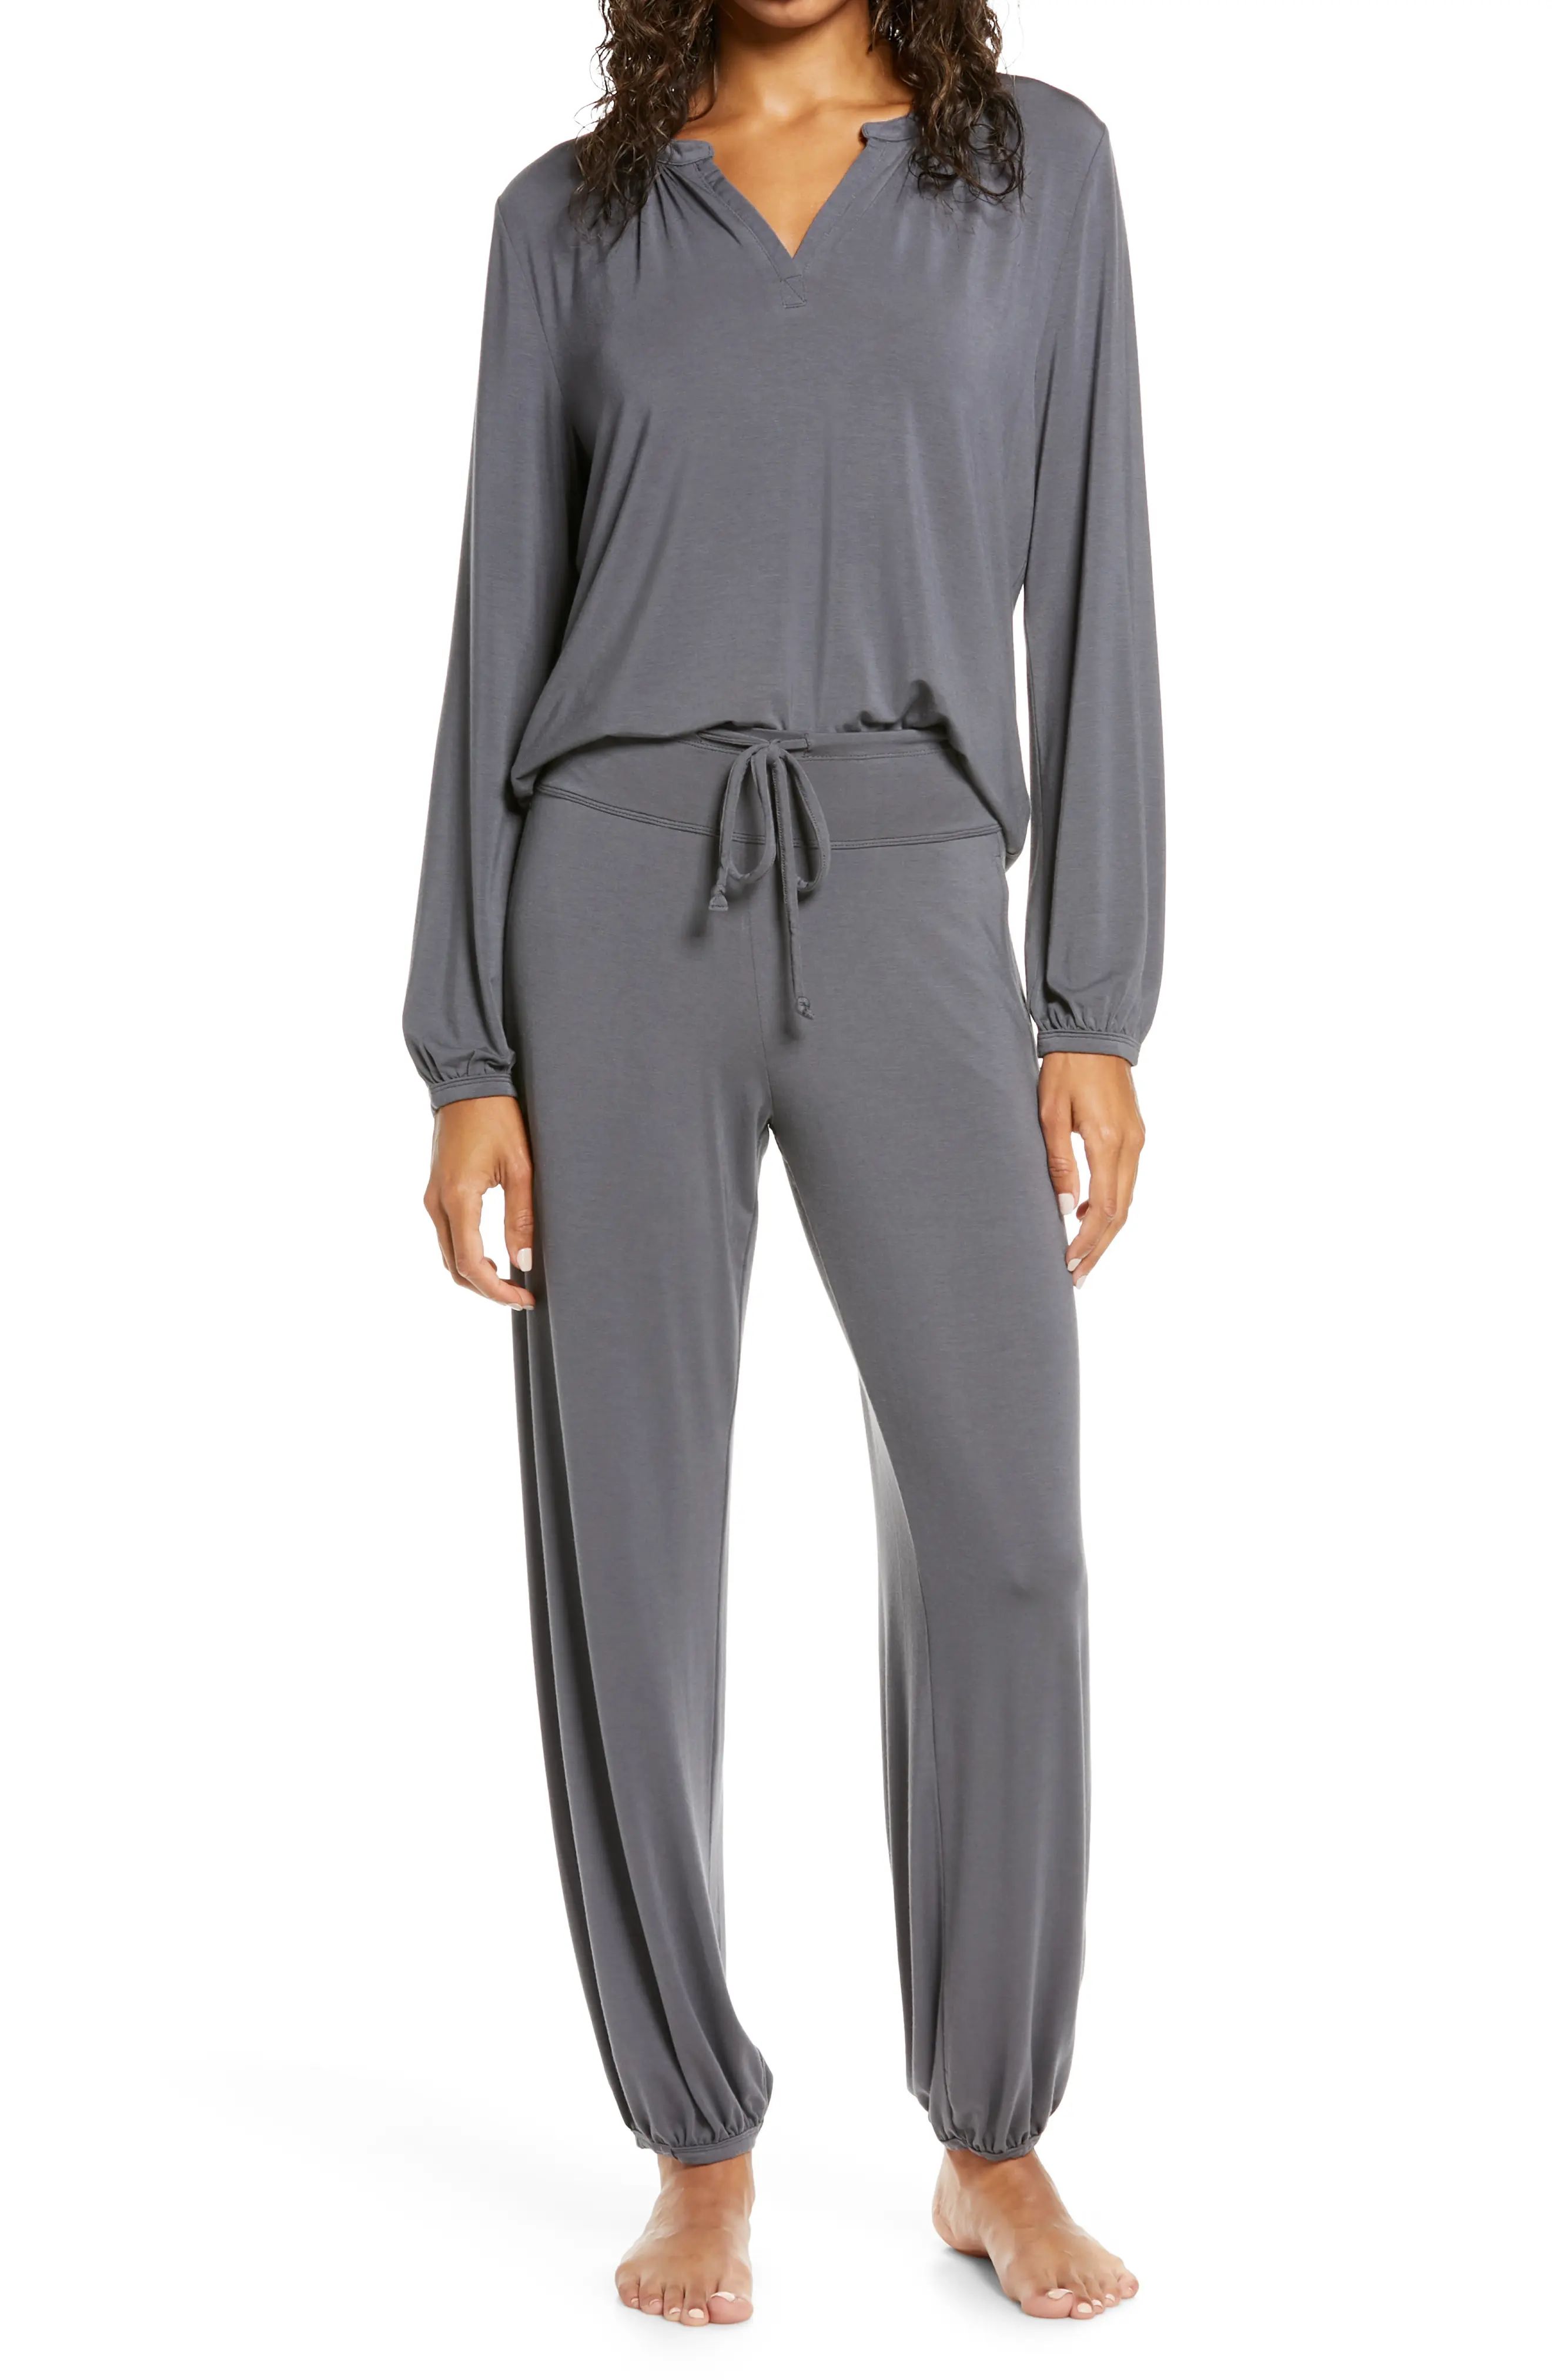 Barefoot Dreams(R) Namaste Two-Piece Lounge Set in Graphite at Nordstrom, Size Medium | Nordstrom